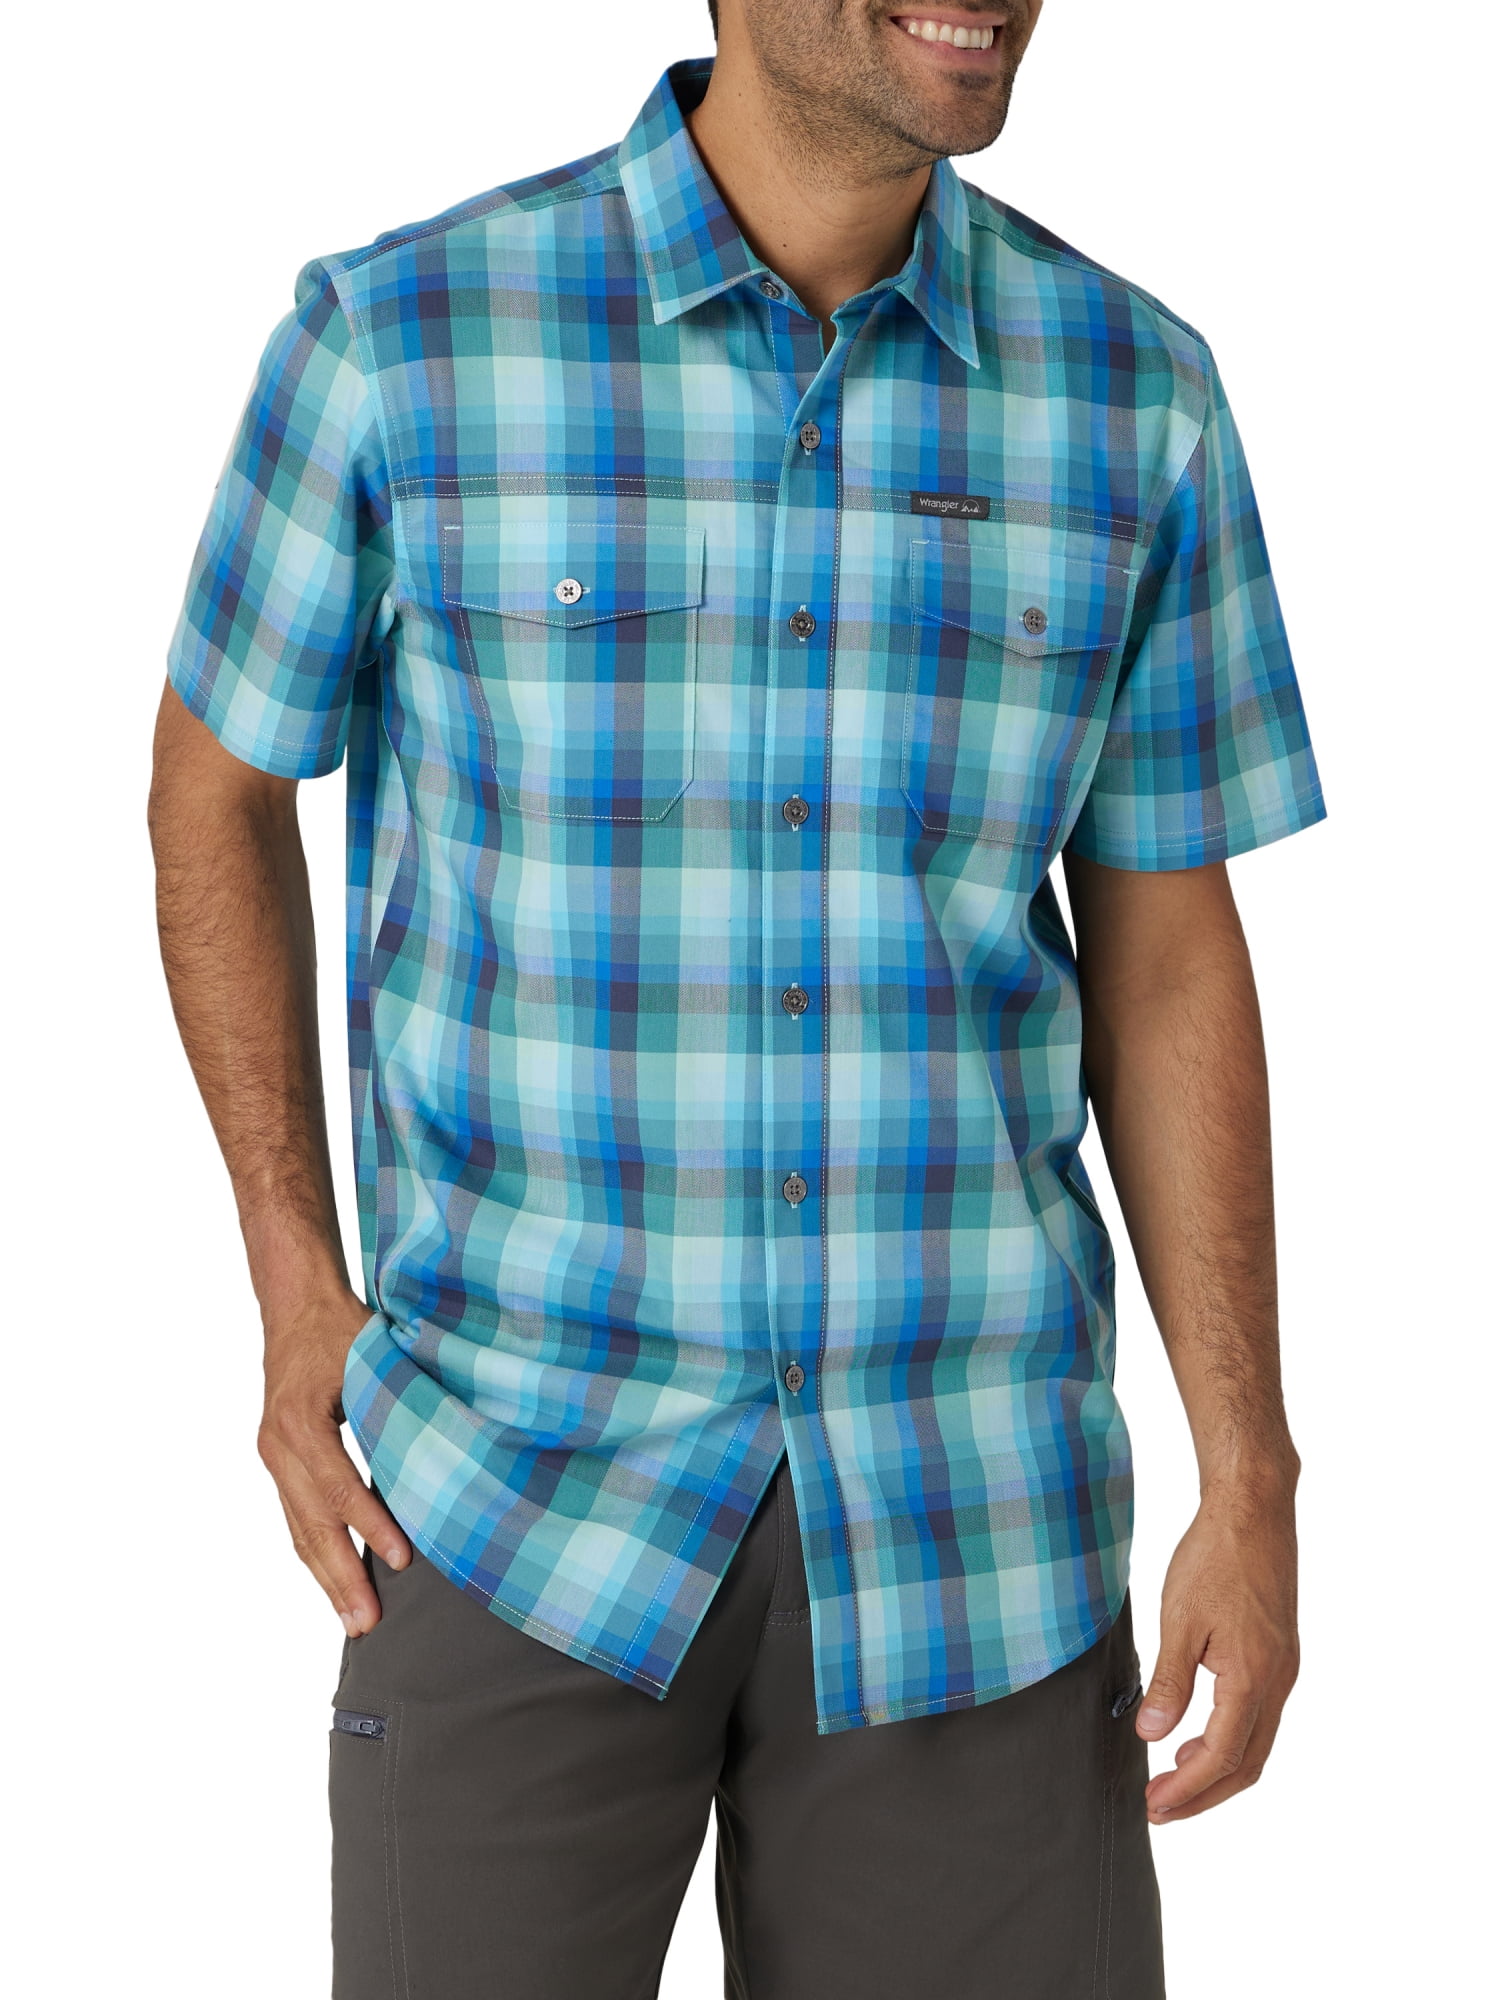 Wrangler Men's Outdoor Short Sleeve Shirt with UPF 40 Protection, Sizes S- 5XL 